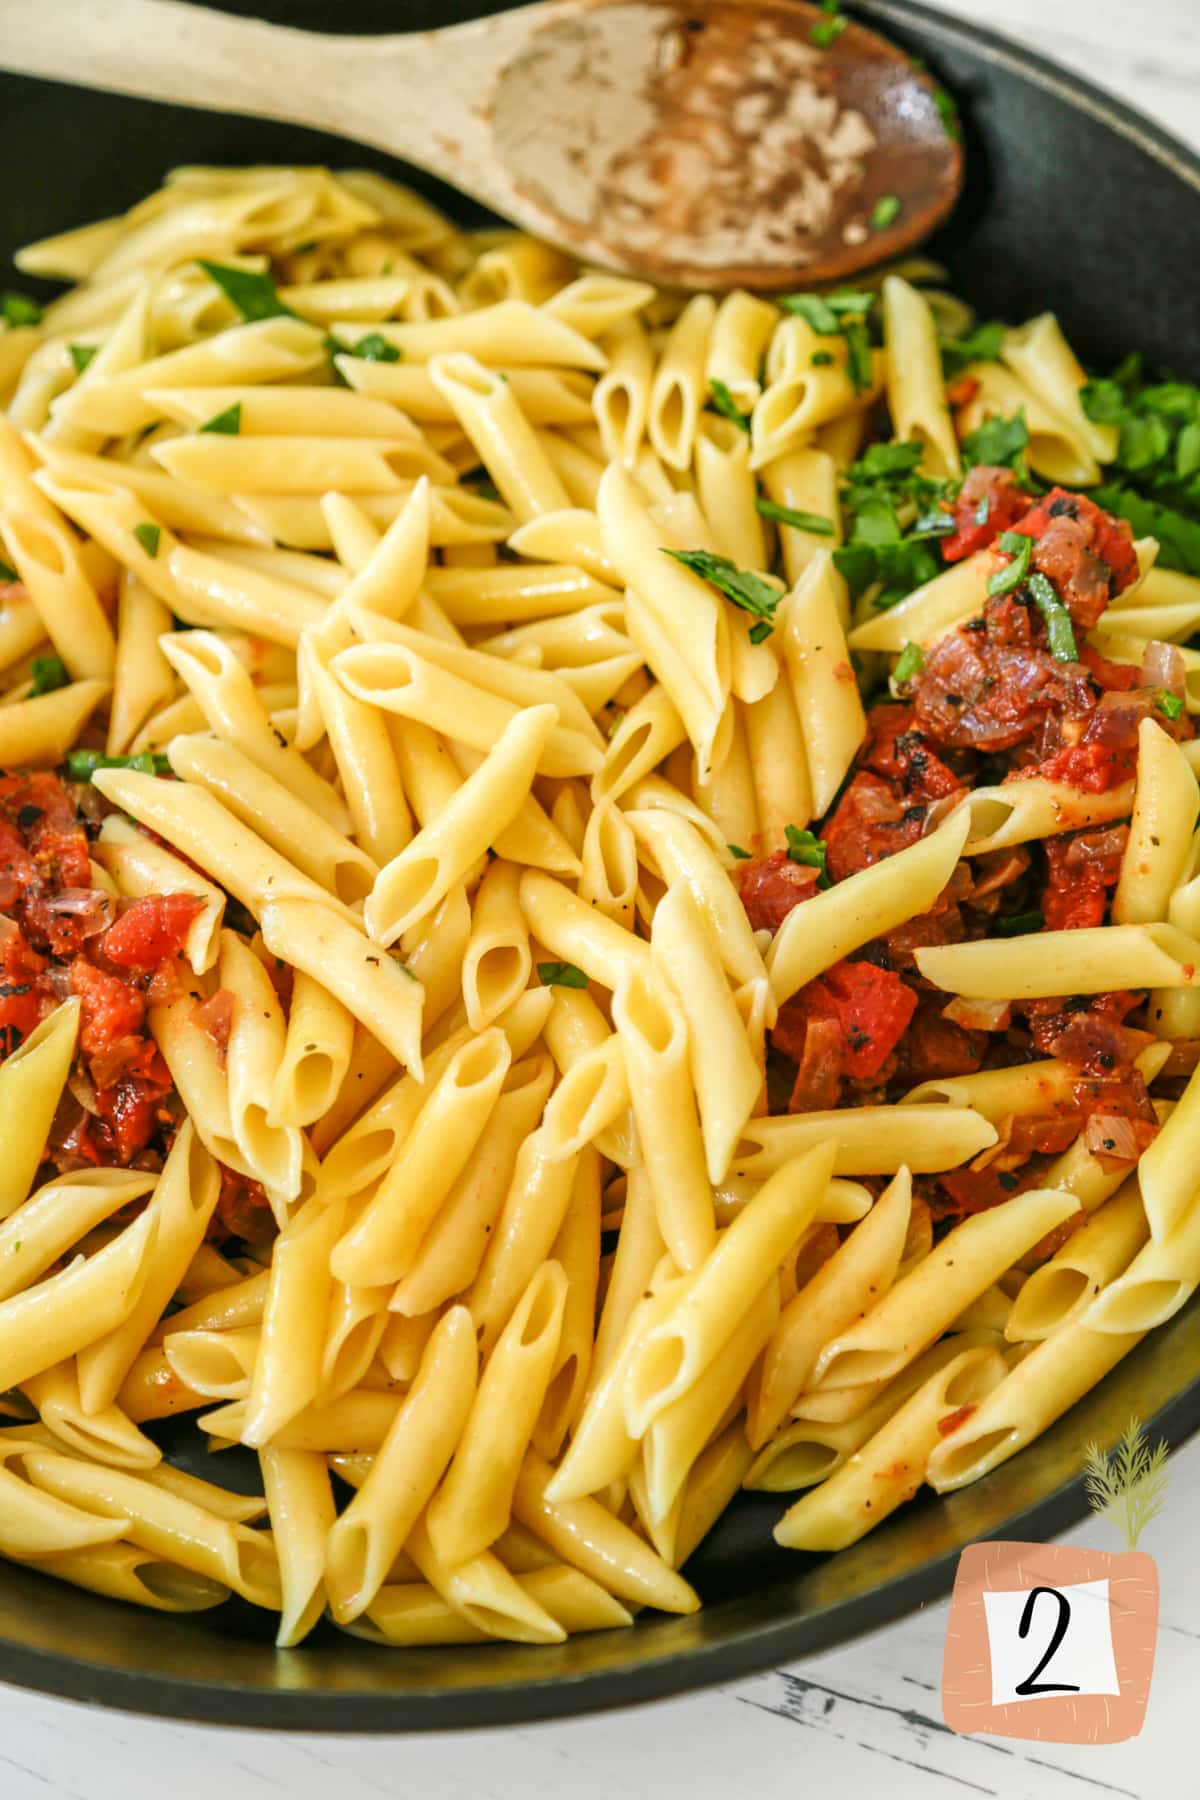 An iron skillet with penne pasta, tomatoes, and spinach.